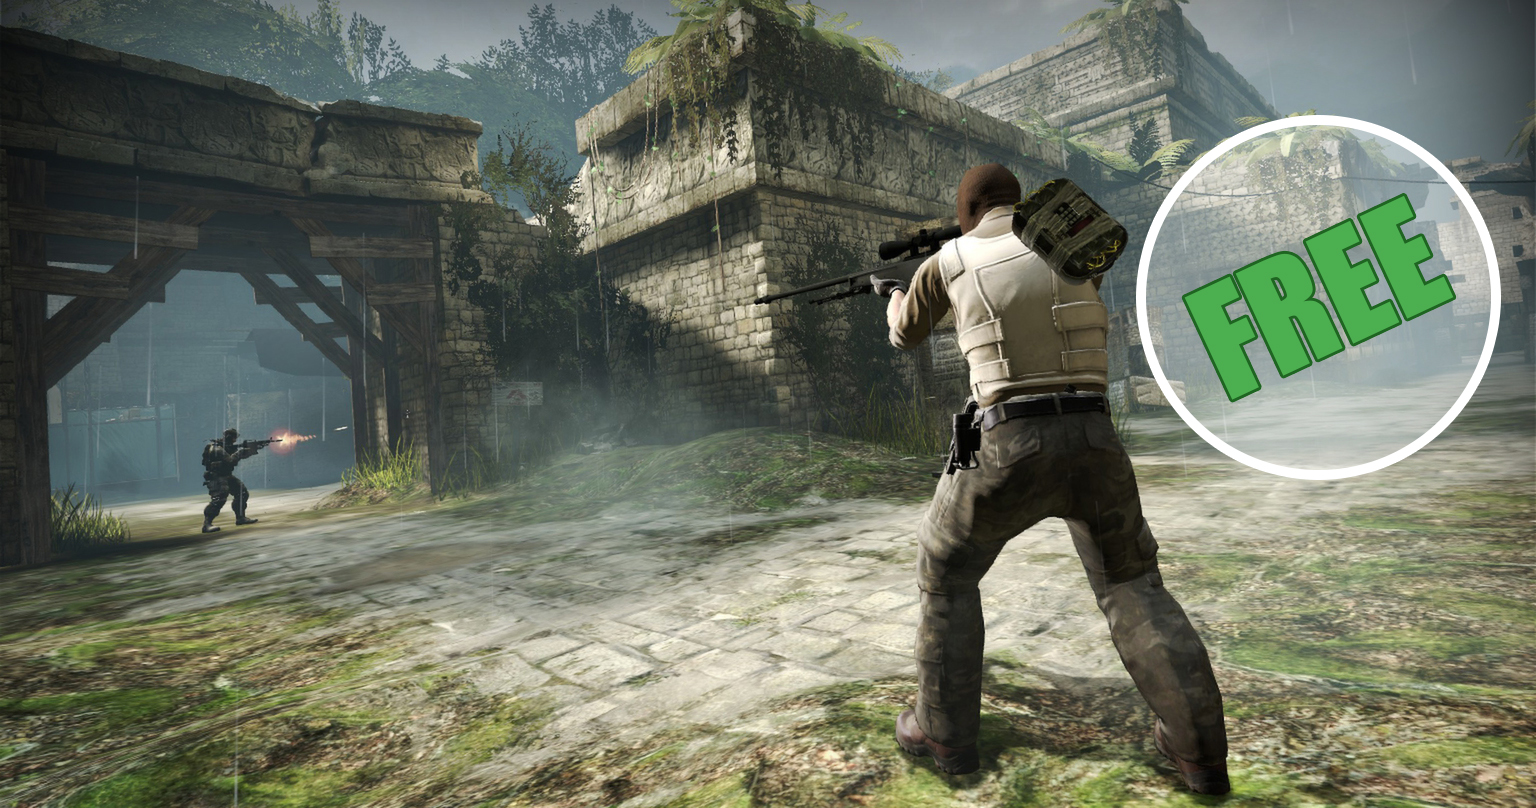 Free Version Of Counter-Strike: Global Offensive Lets You Play